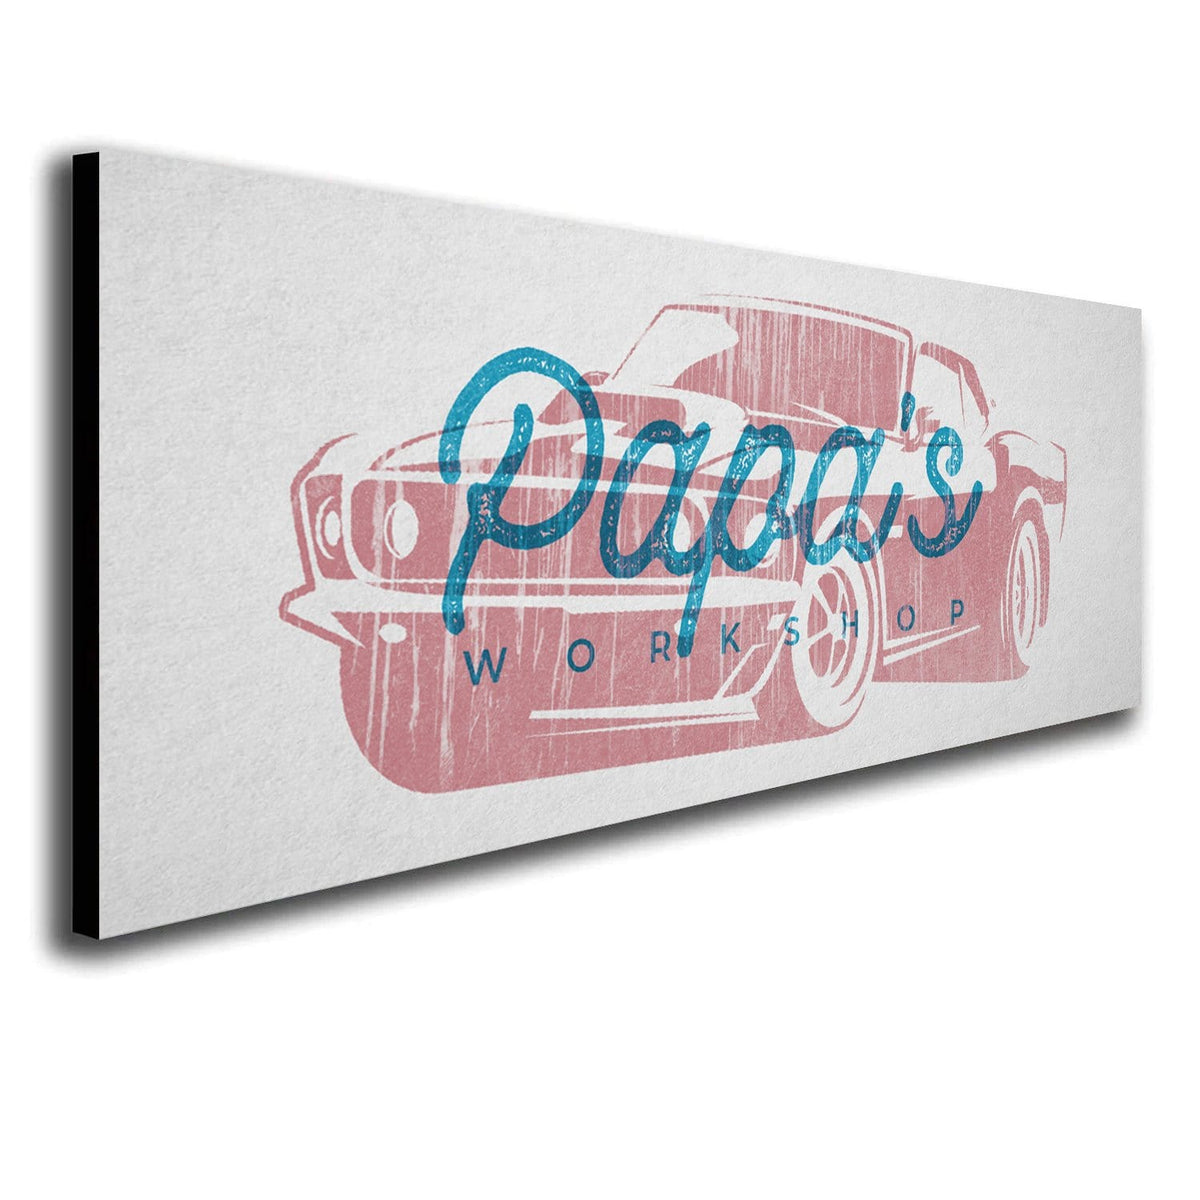 Dad or Grandpa Gift - Personalized Garage Car Sign